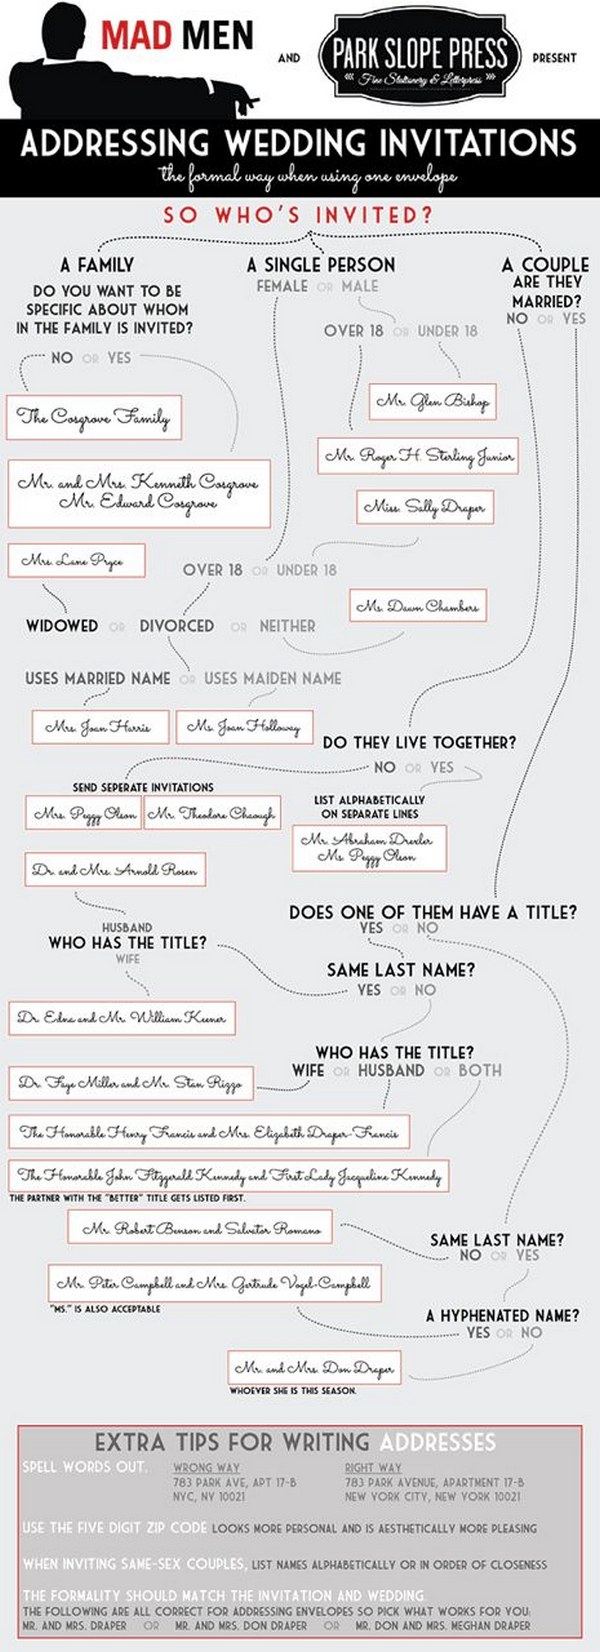 incredibly helpful infographic for properly addressing your wedding invitations